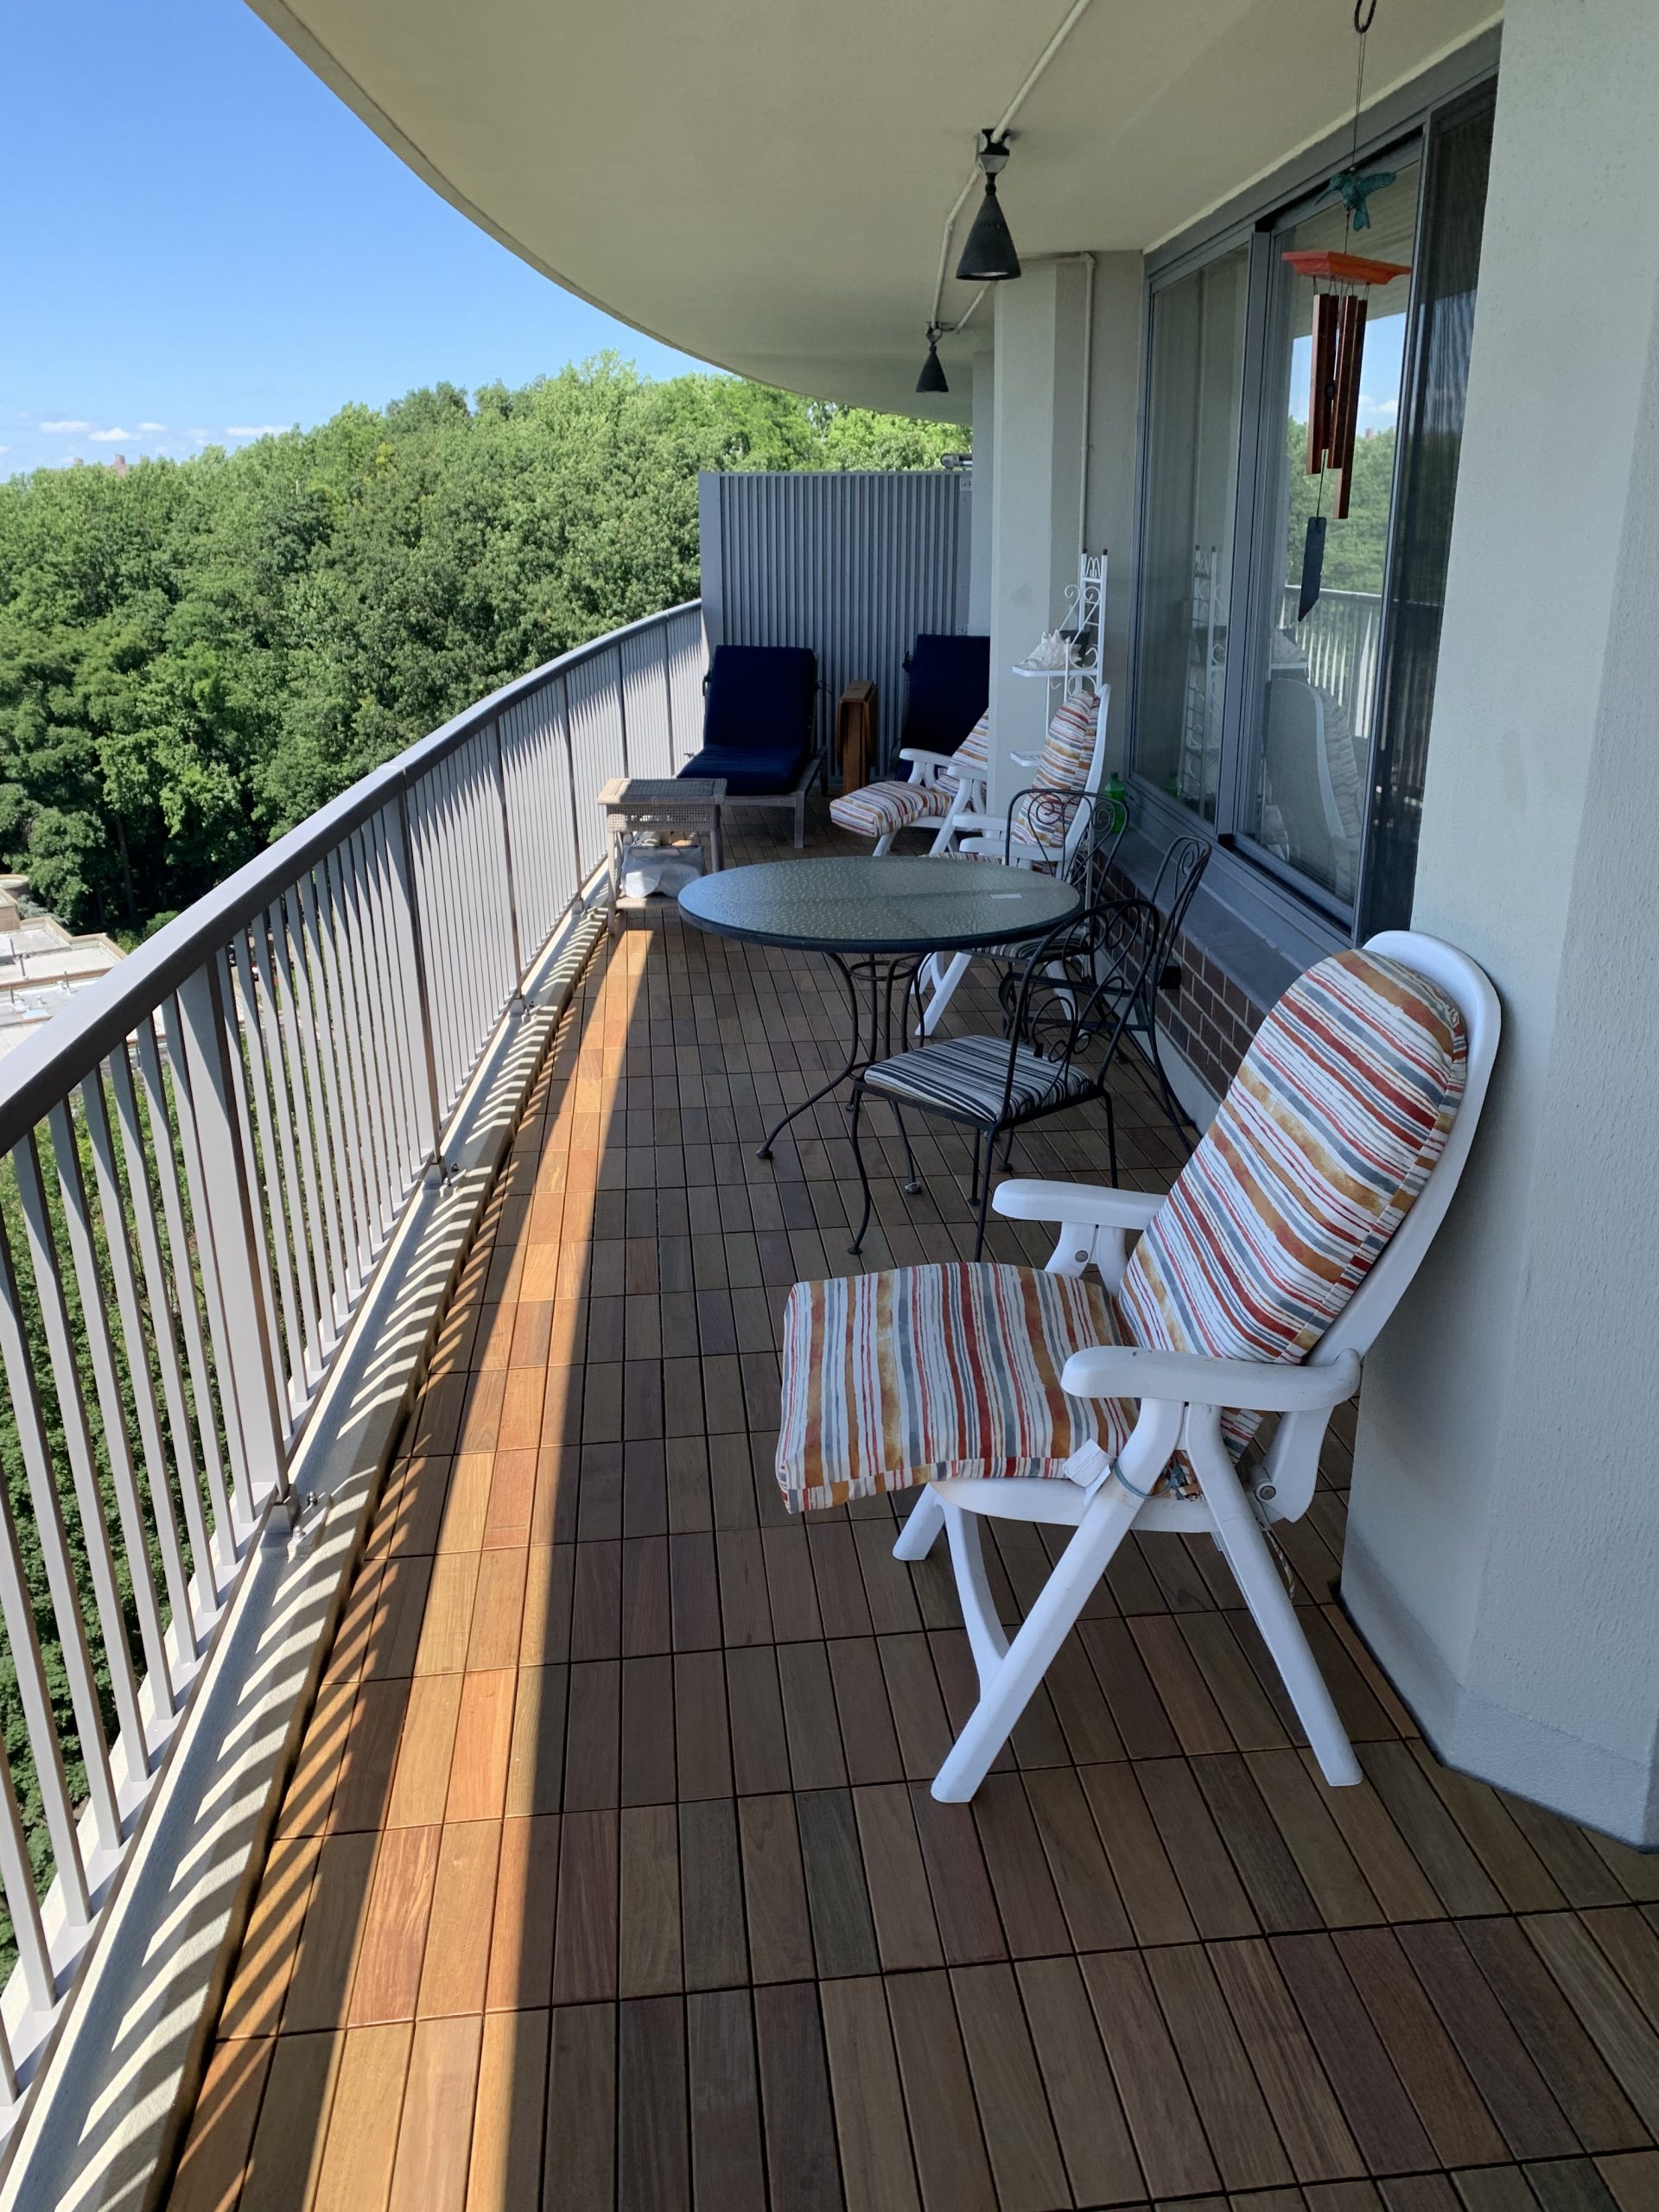 Before and After Ipe Wood Deck Tiles